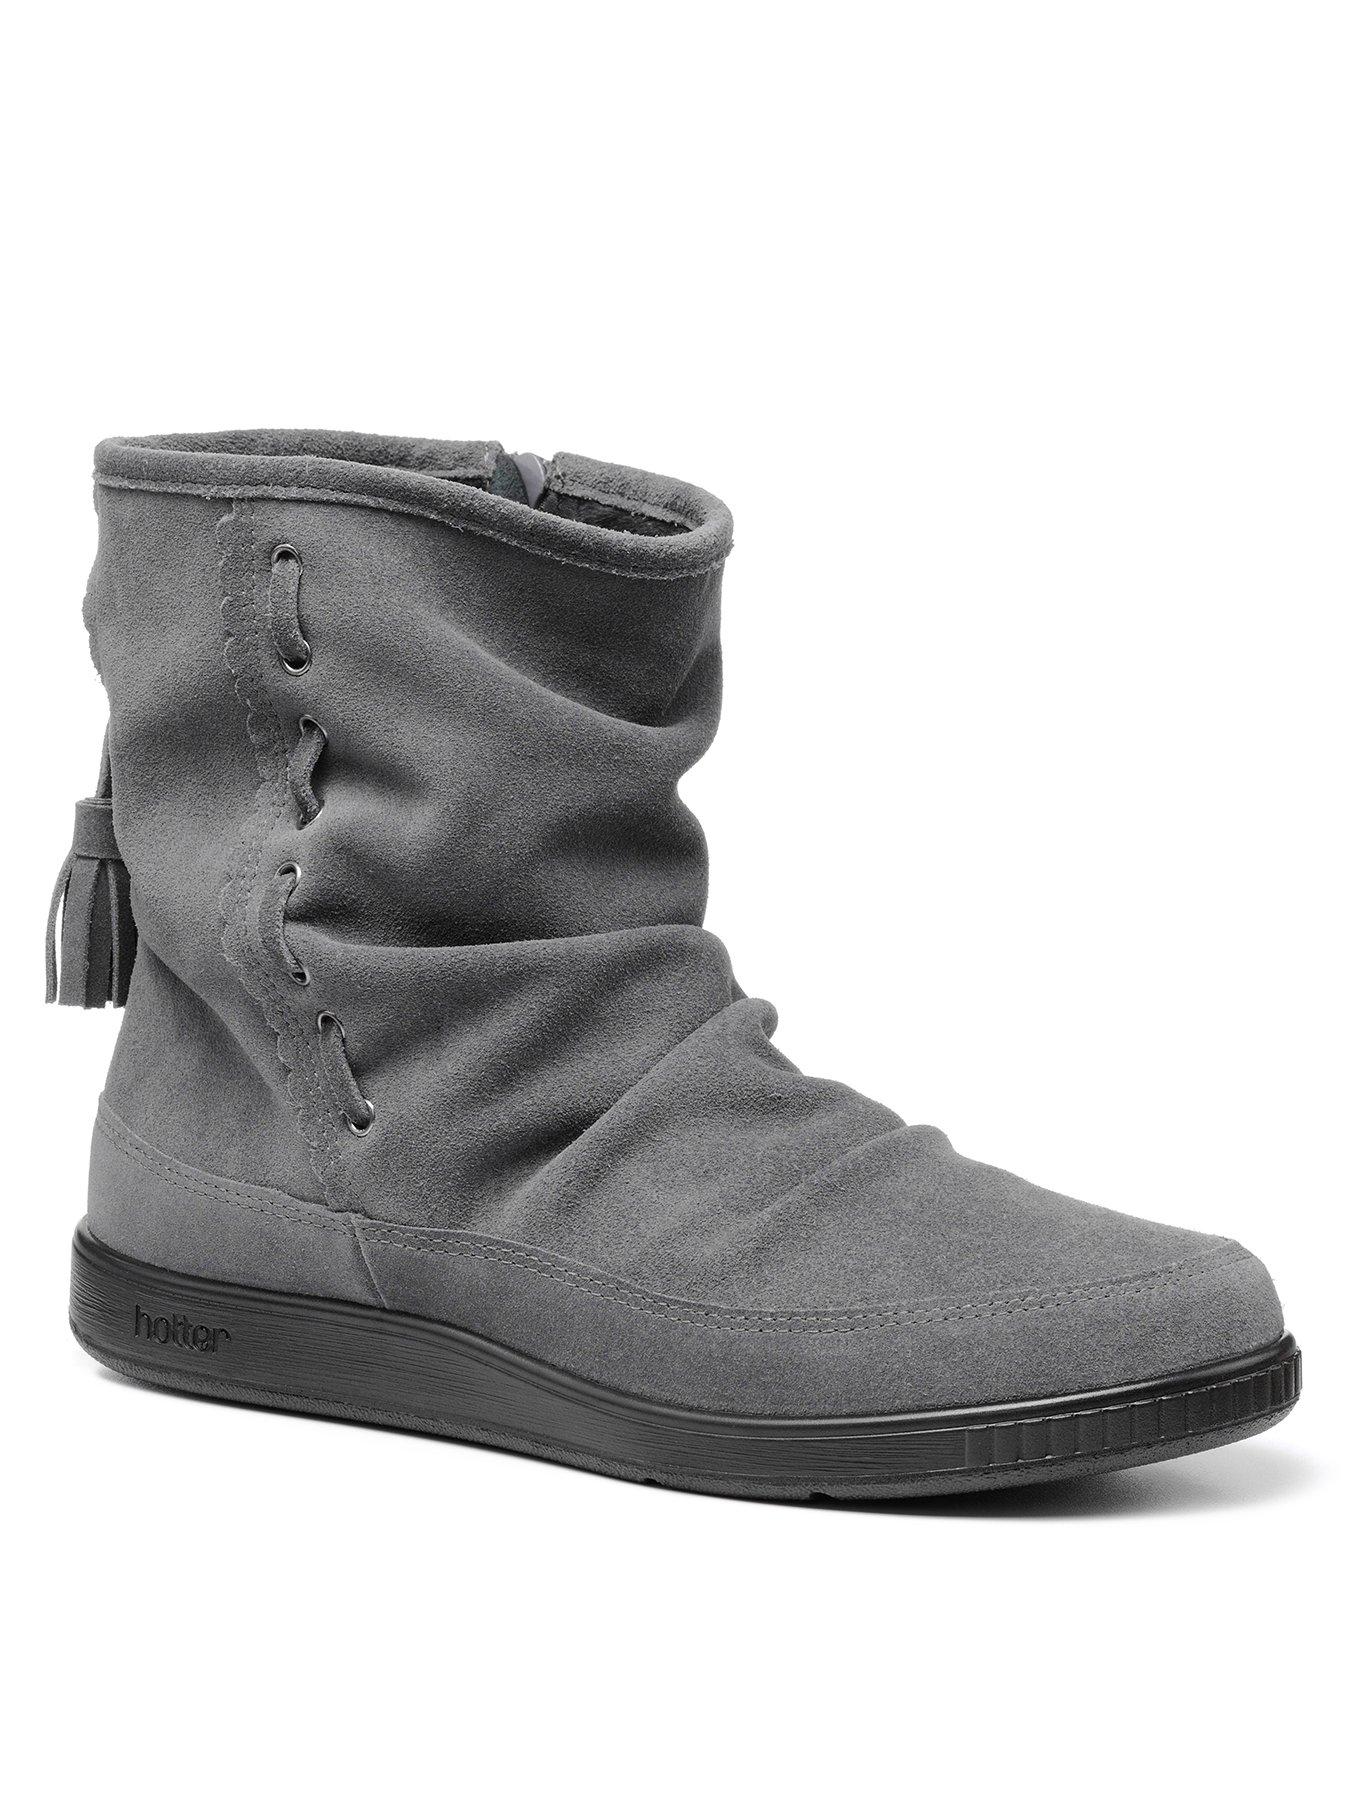 womens grey ankle boots uk